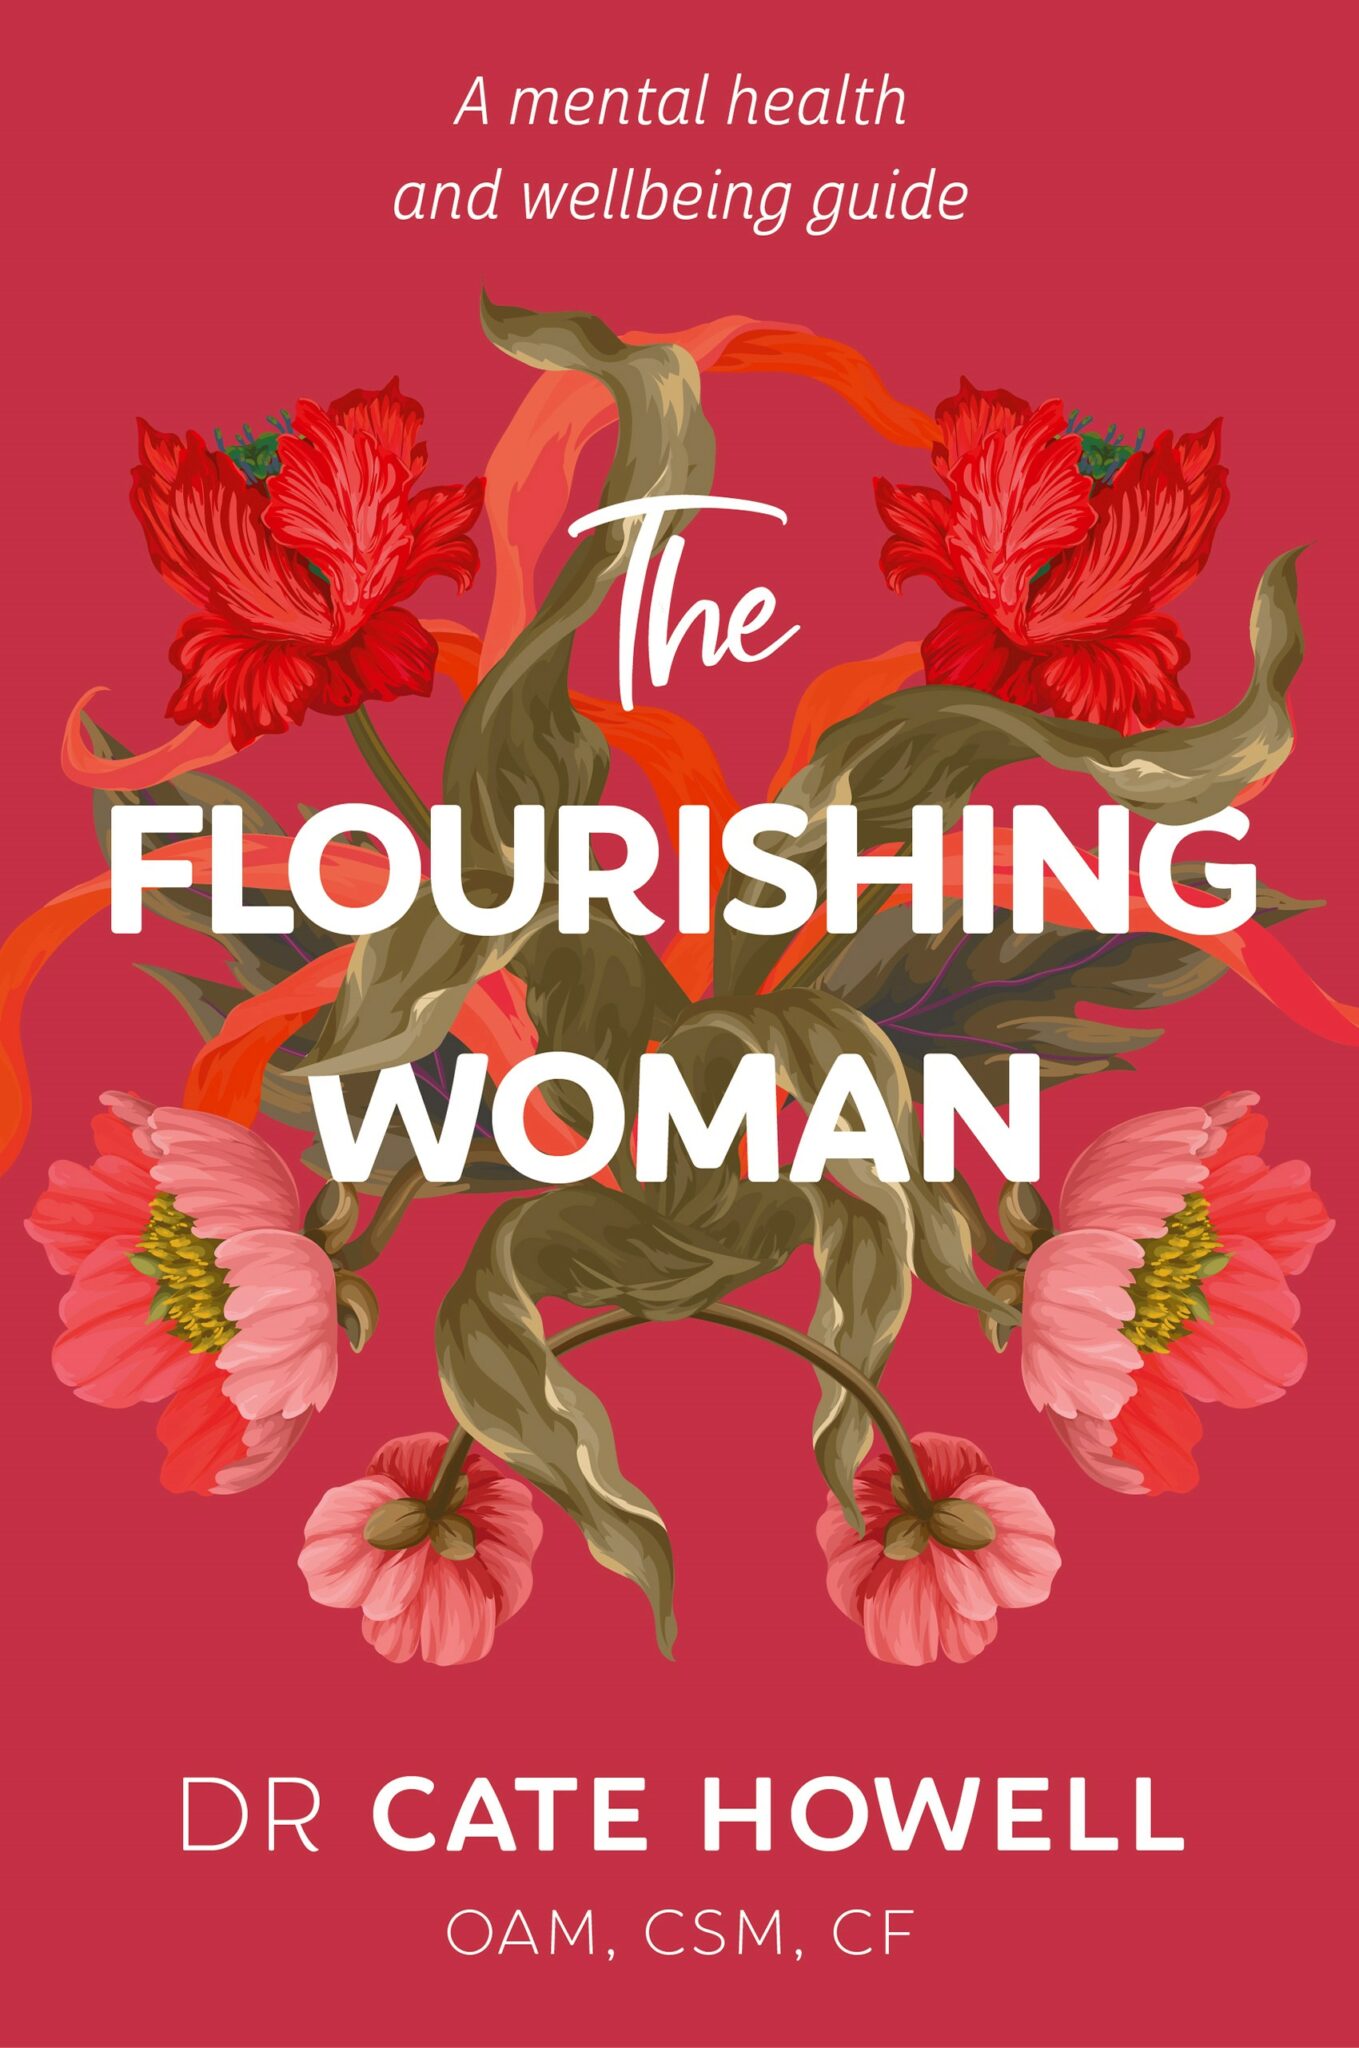 The Flourishing Woman: A mental health and wellbeing guide